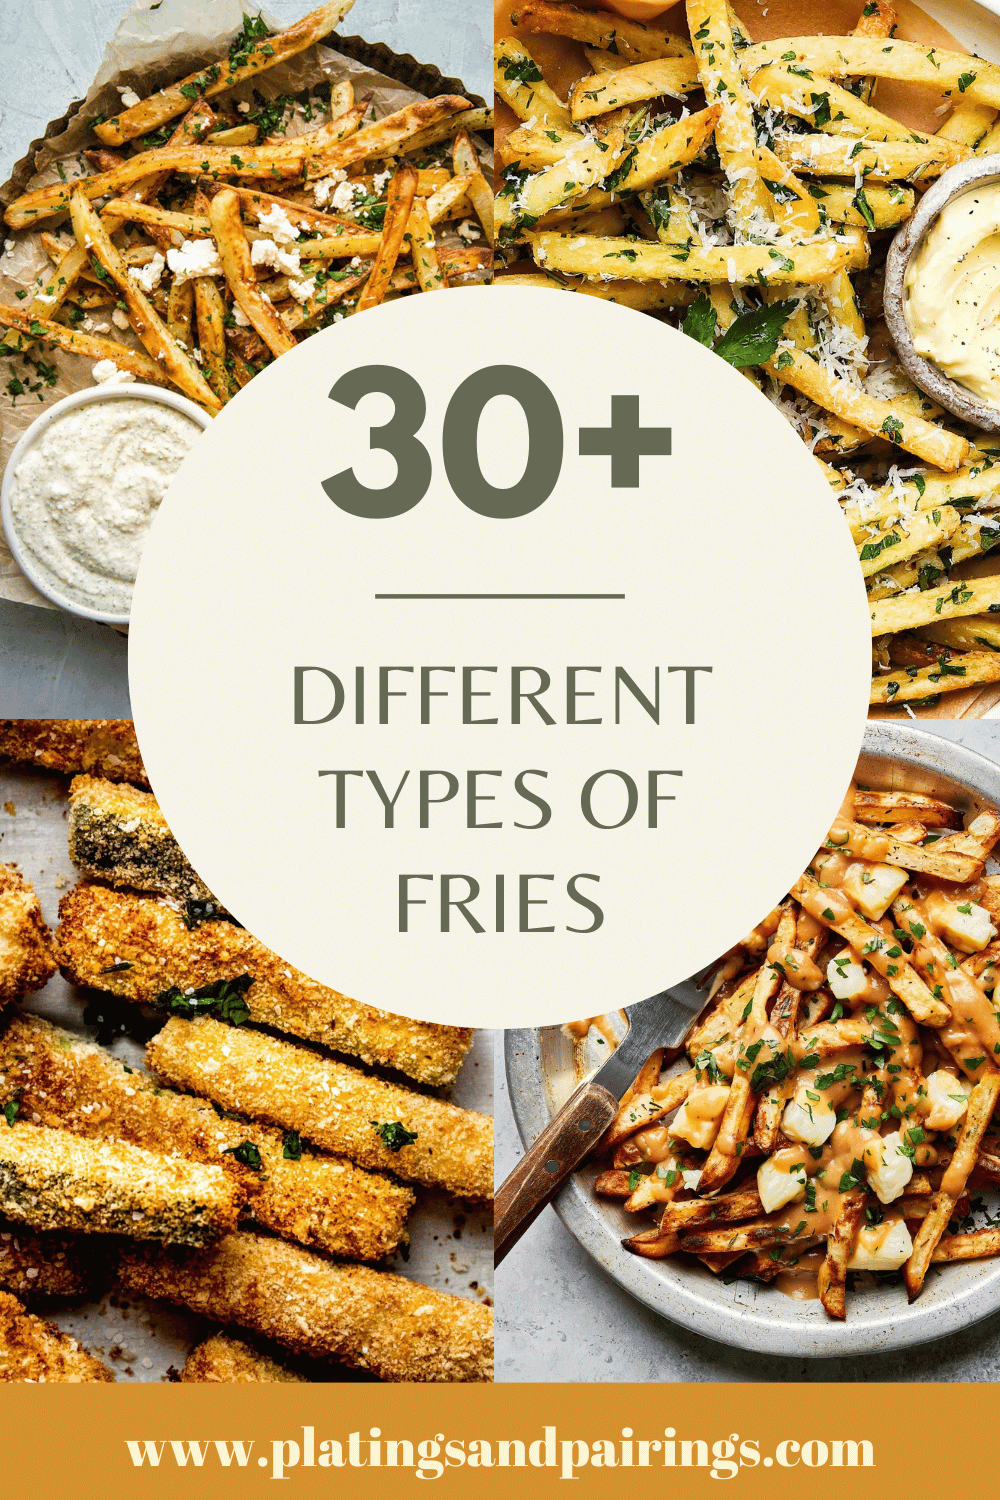 COLLAGE OF TYPES OF FRIES WITH TEXT OVERLAY.